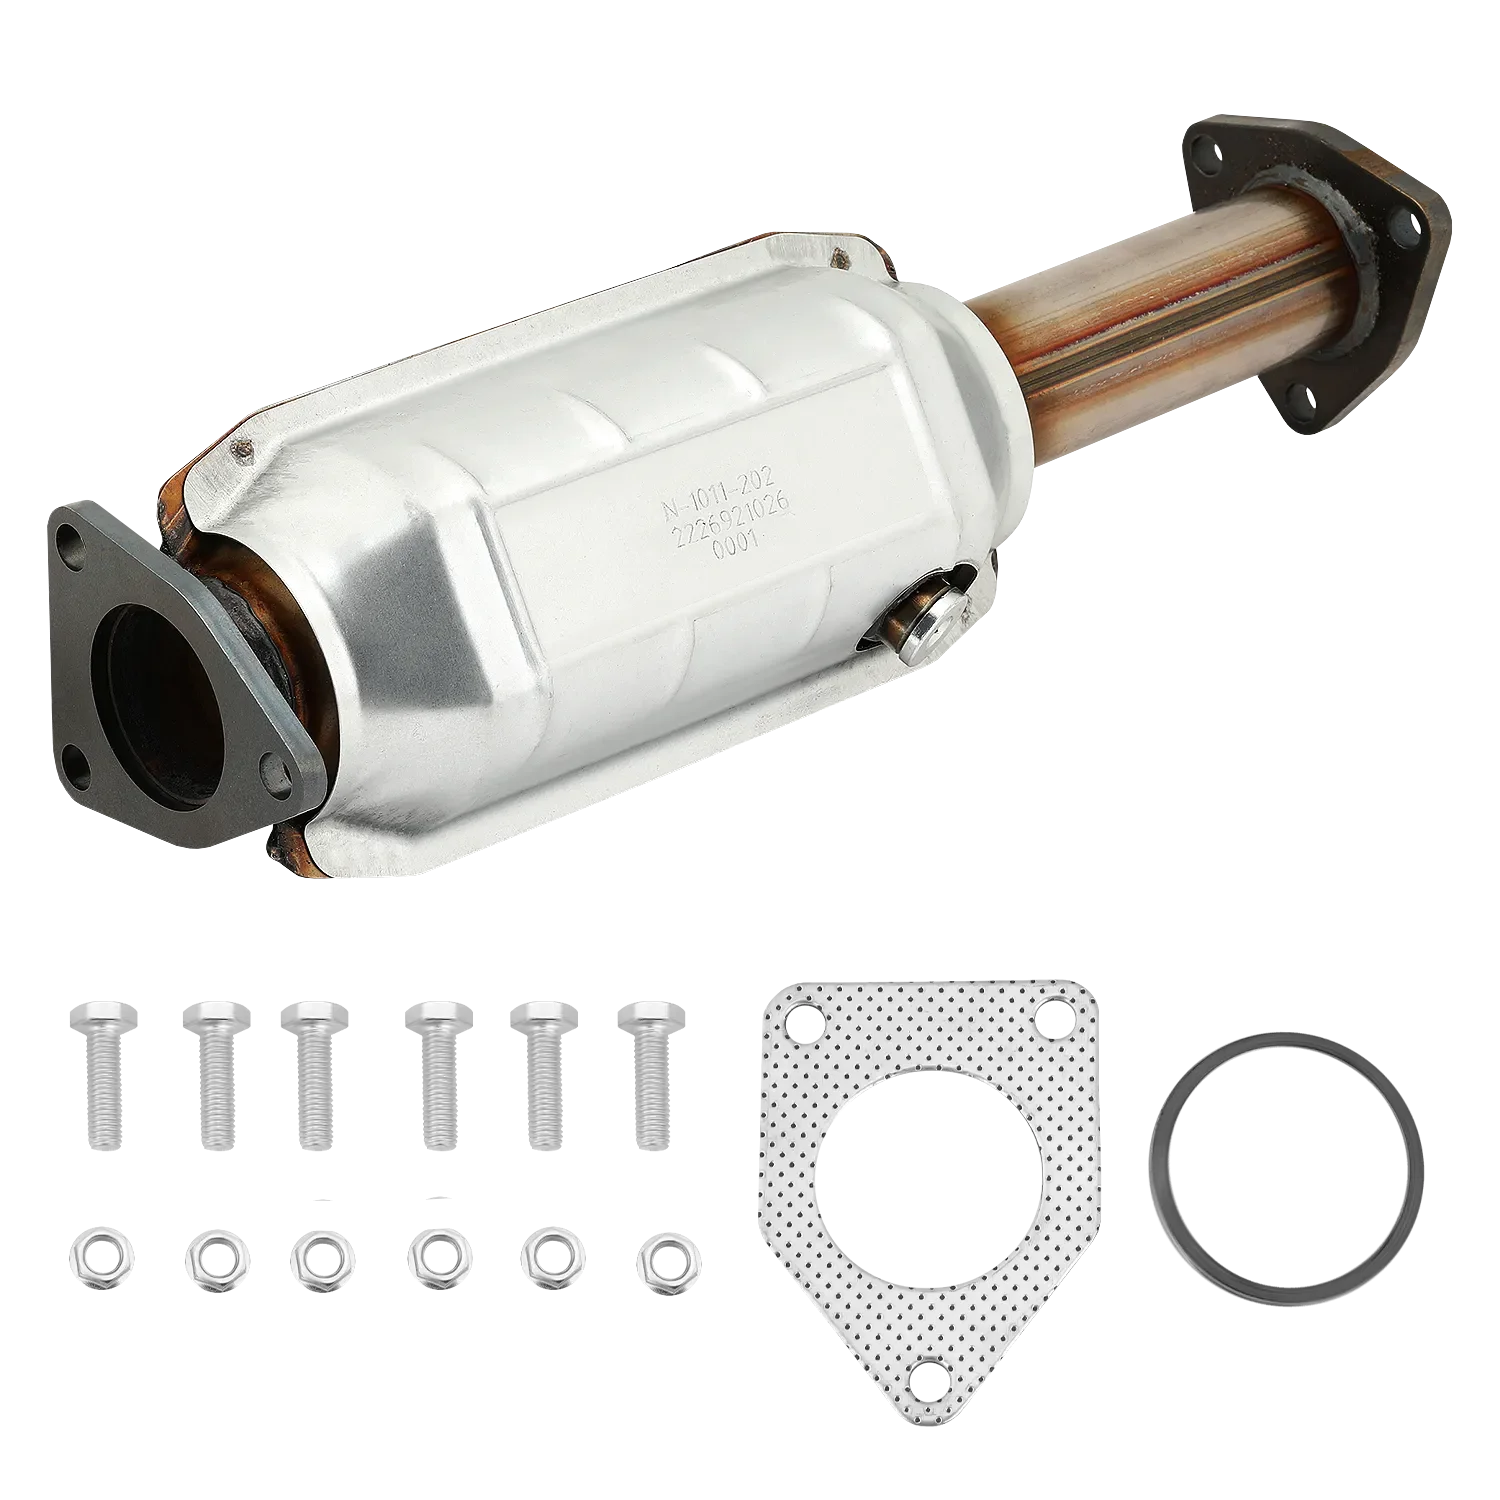 

EPA Approved Catalytic Converter Direct Fits Honda Pilot 2003 2004 3.5L 6 Cyl 16361 Car Exhaust Systems Mufflers Manifold